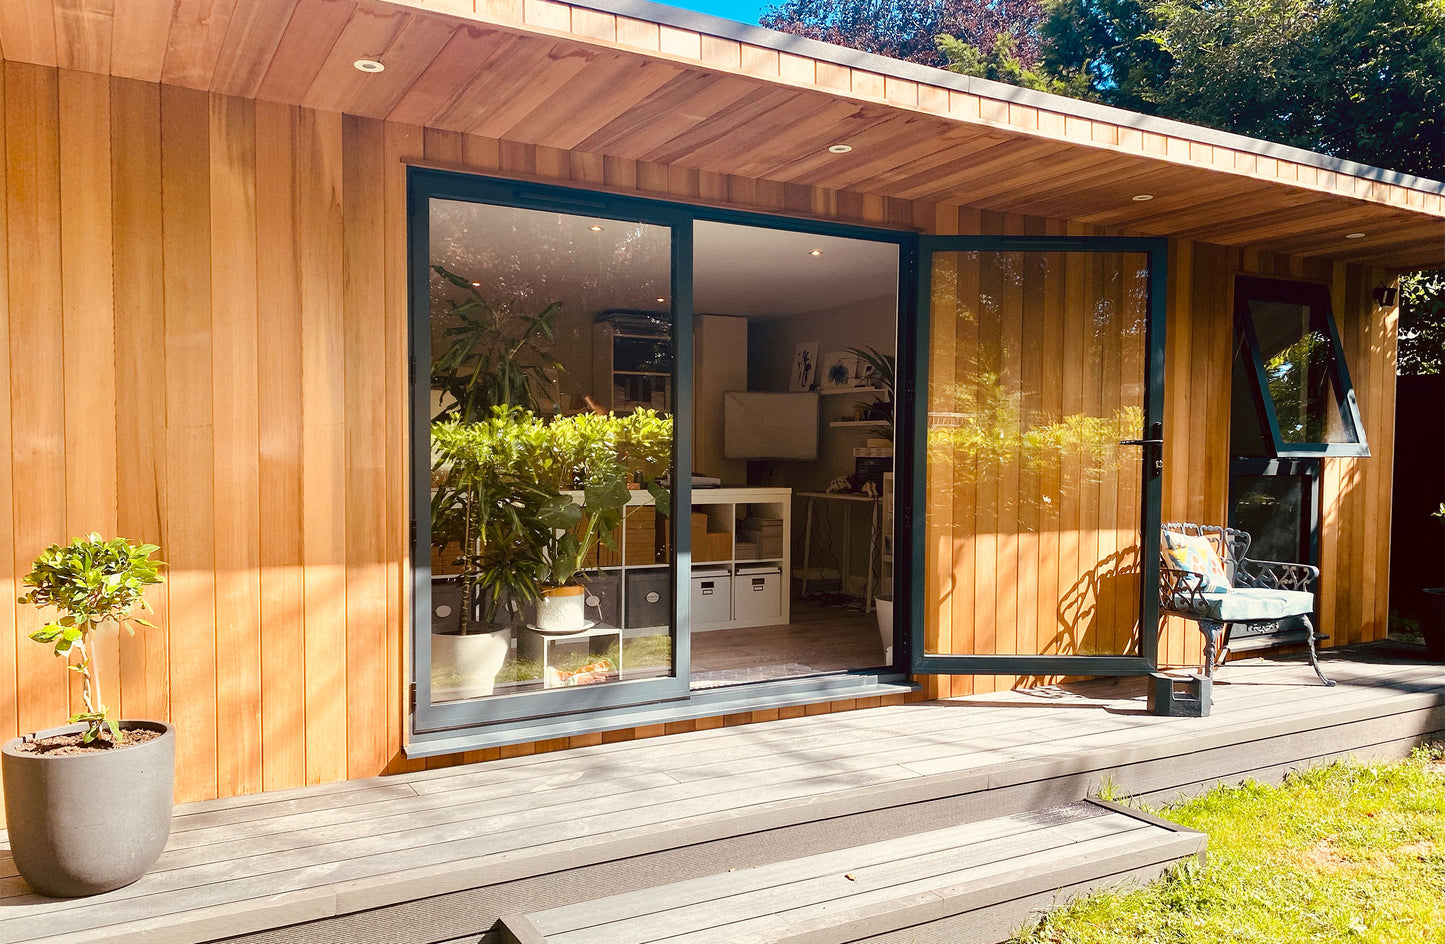 We’ve now been in the new garden studio for a few months now and so I thought it’d be a good time to write a blog on the details, from who we used, to how long it took and how we decided on the interior of it.